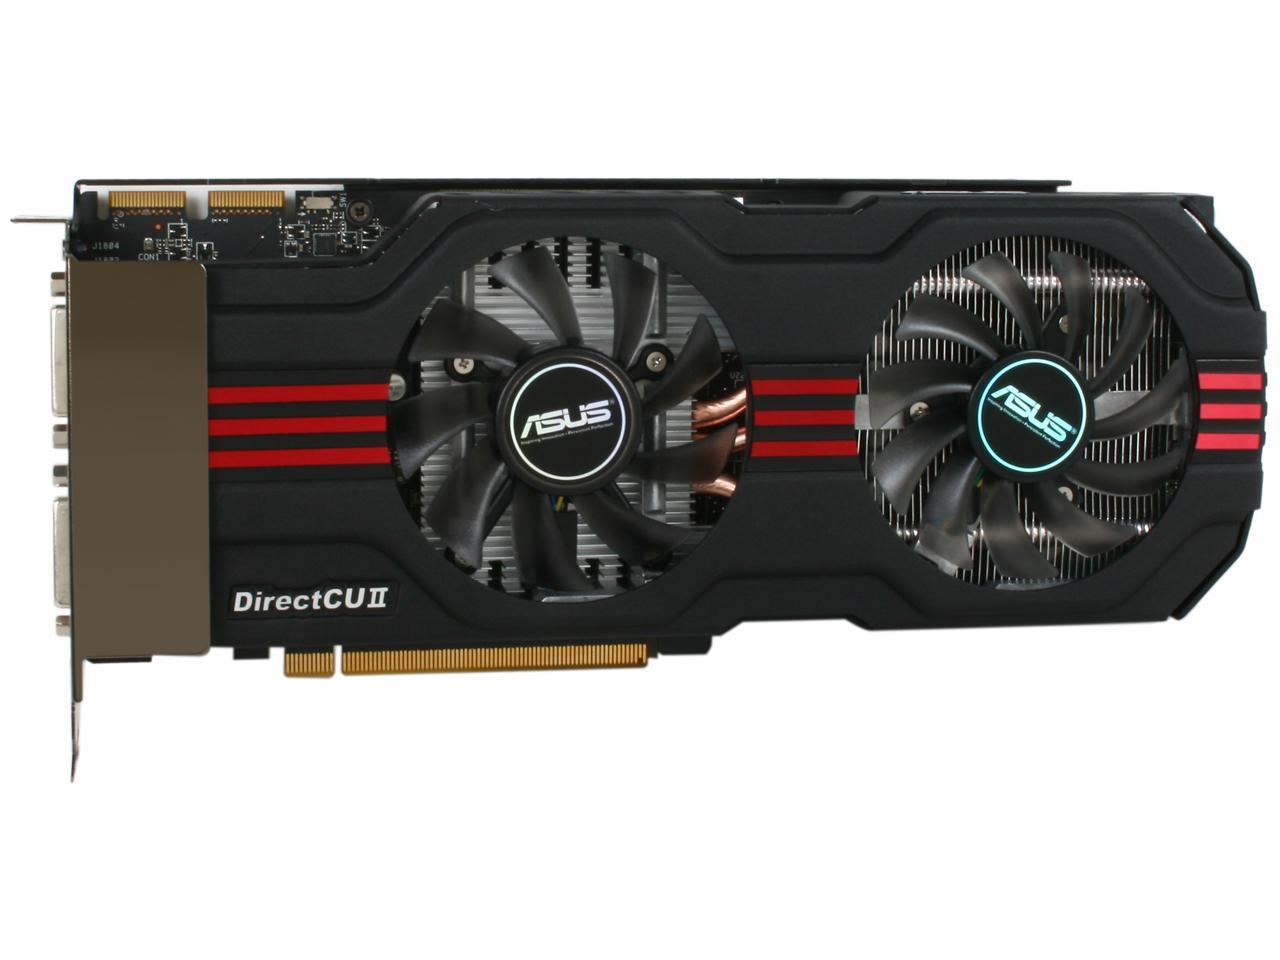 ASUS AMD Radeon Dual Fan HD 6950 with Super Alloy Power and DisplayPort Outputs Video Card EAH6950 DCII/2DI4S/2GD5 